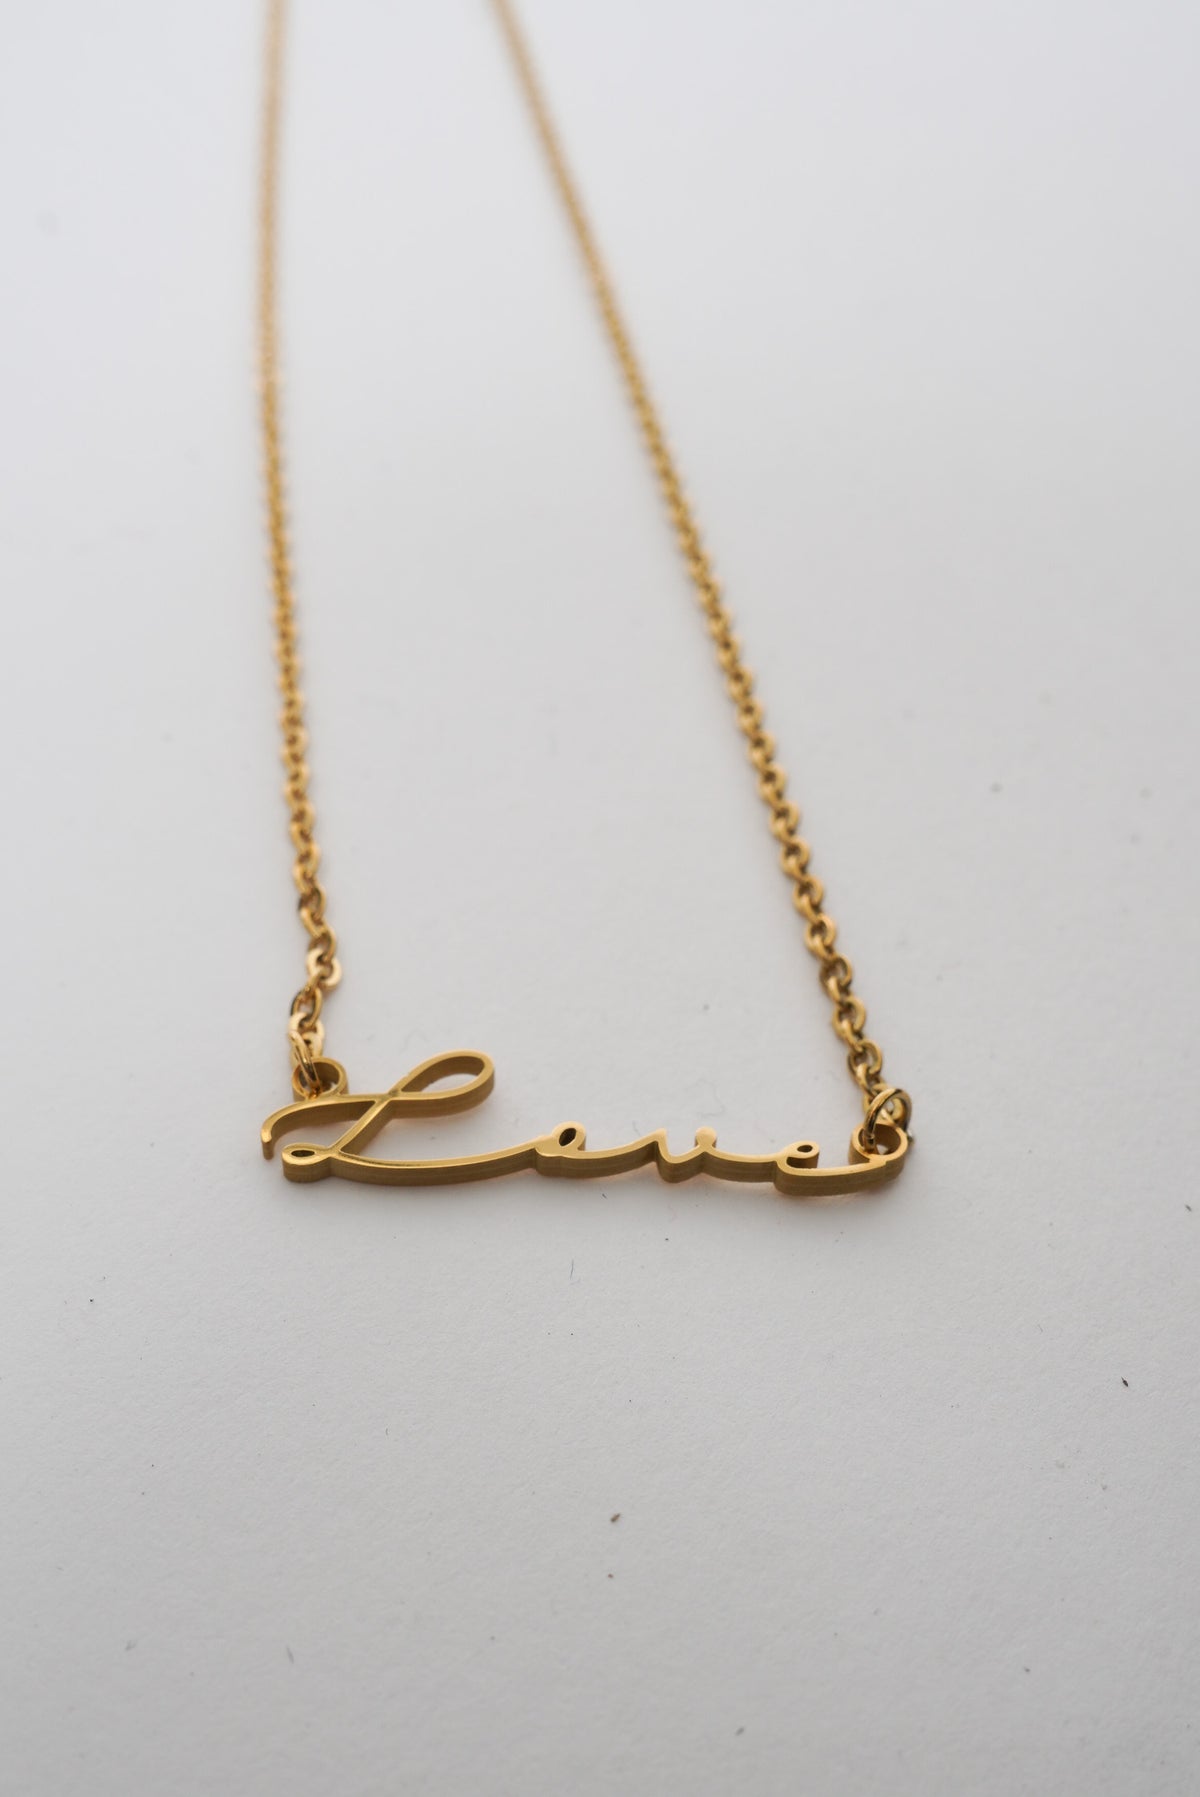 A dainty gold necklace with the word "love" written in a script font. 